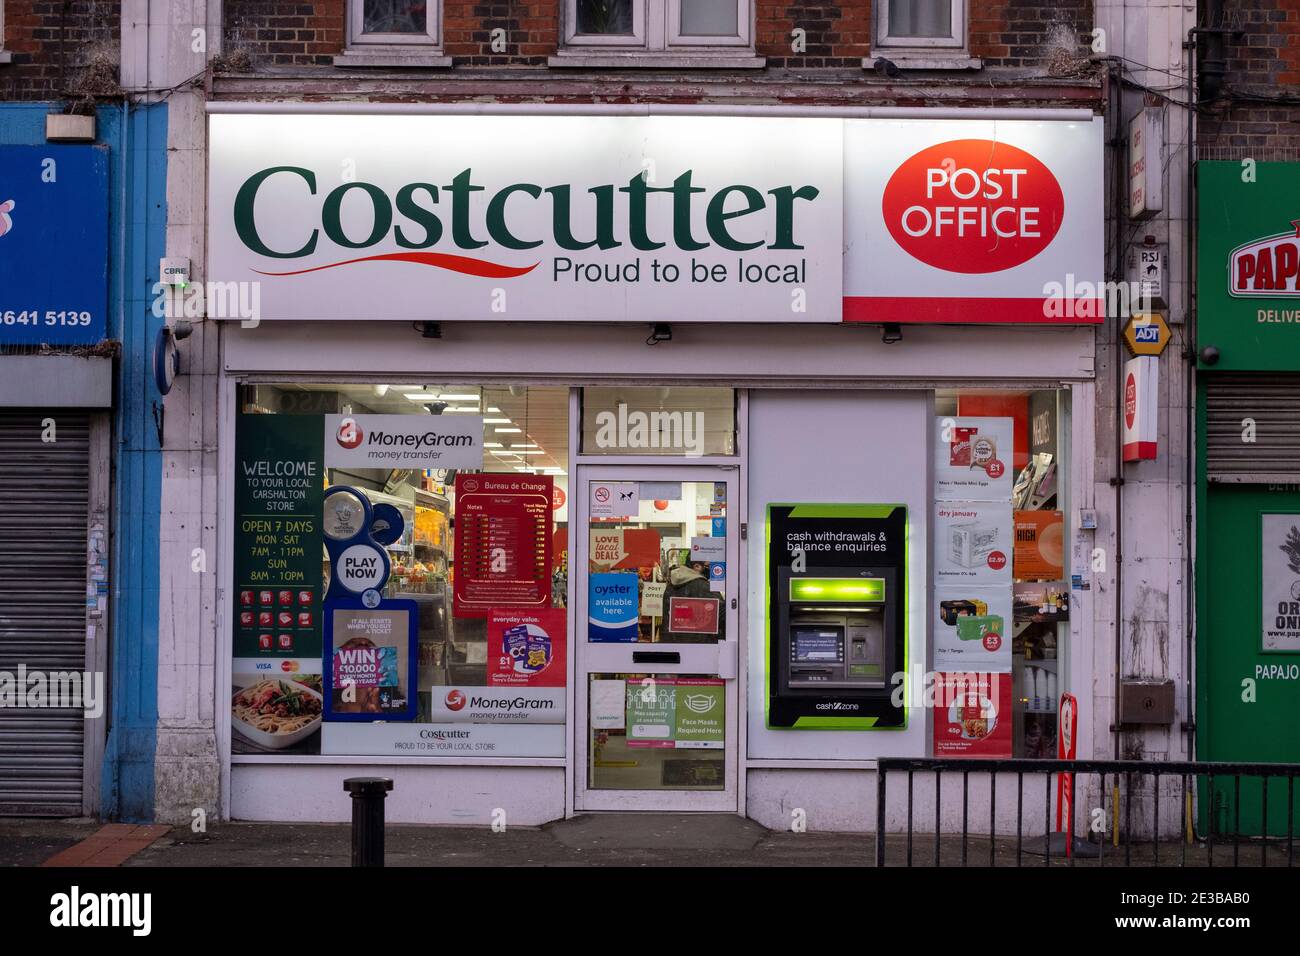 Sutton, Surrey, UK. 18 January 2021. Costcutter local post office and shop, open at Wrythe Lane, St Helier, during the Covid-19 lockdown in January 2021. Credit: Malcolm Park/Alamy. Stock Photo